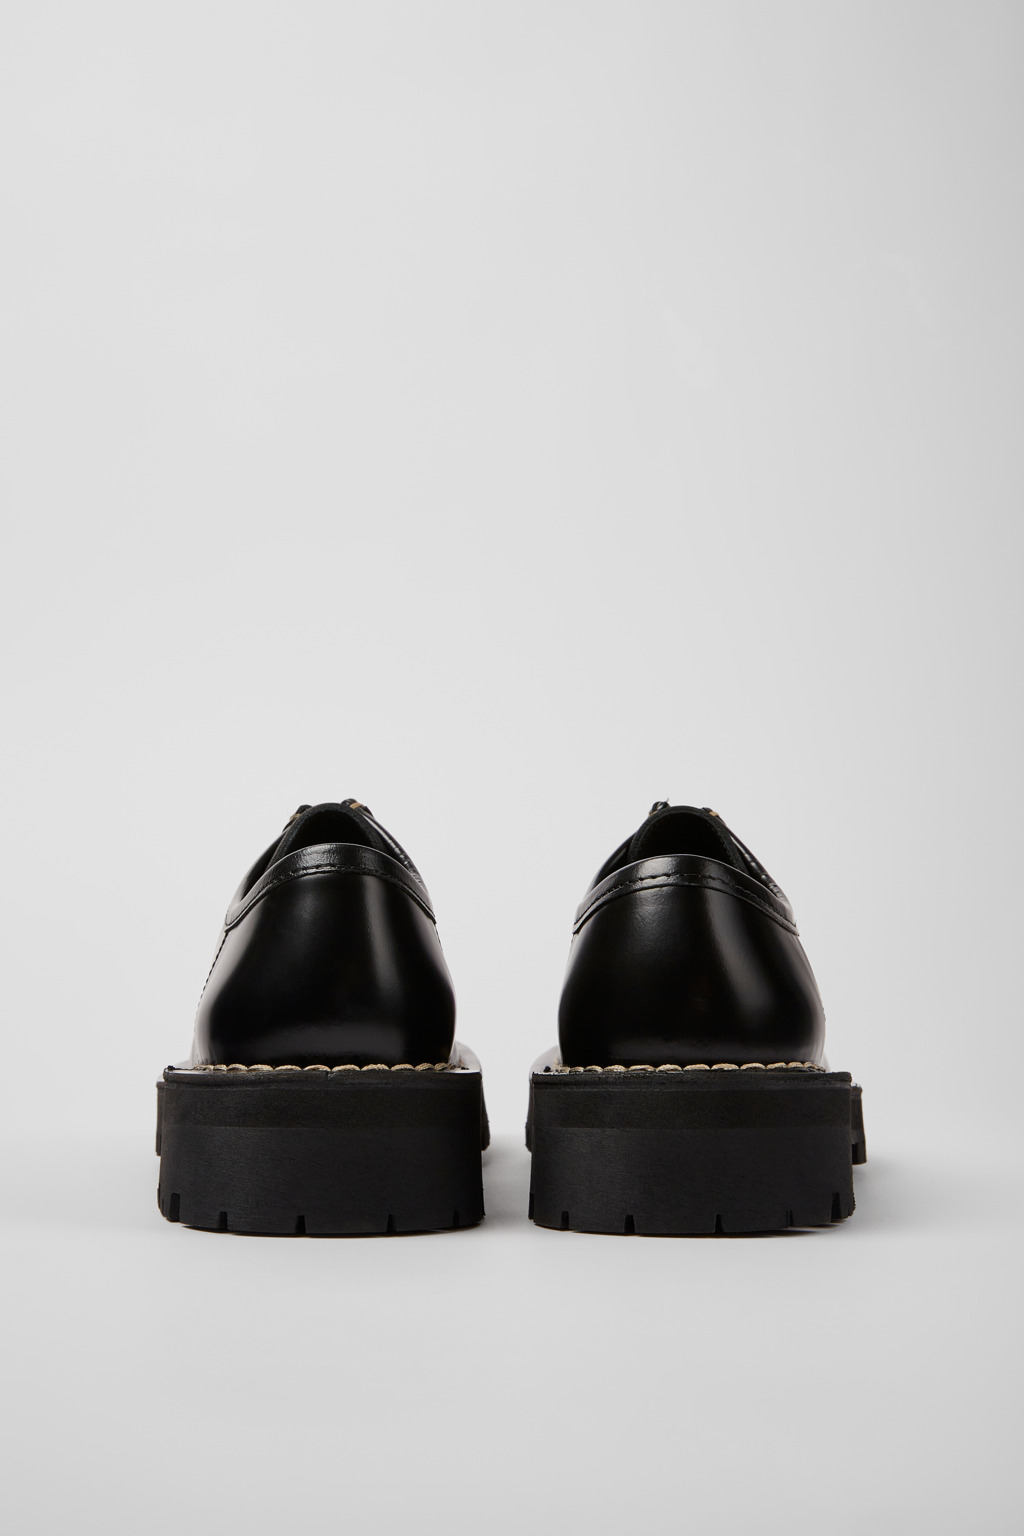 EKI Black Loafers for Unisex - Fall/Winter collection - Camper USA